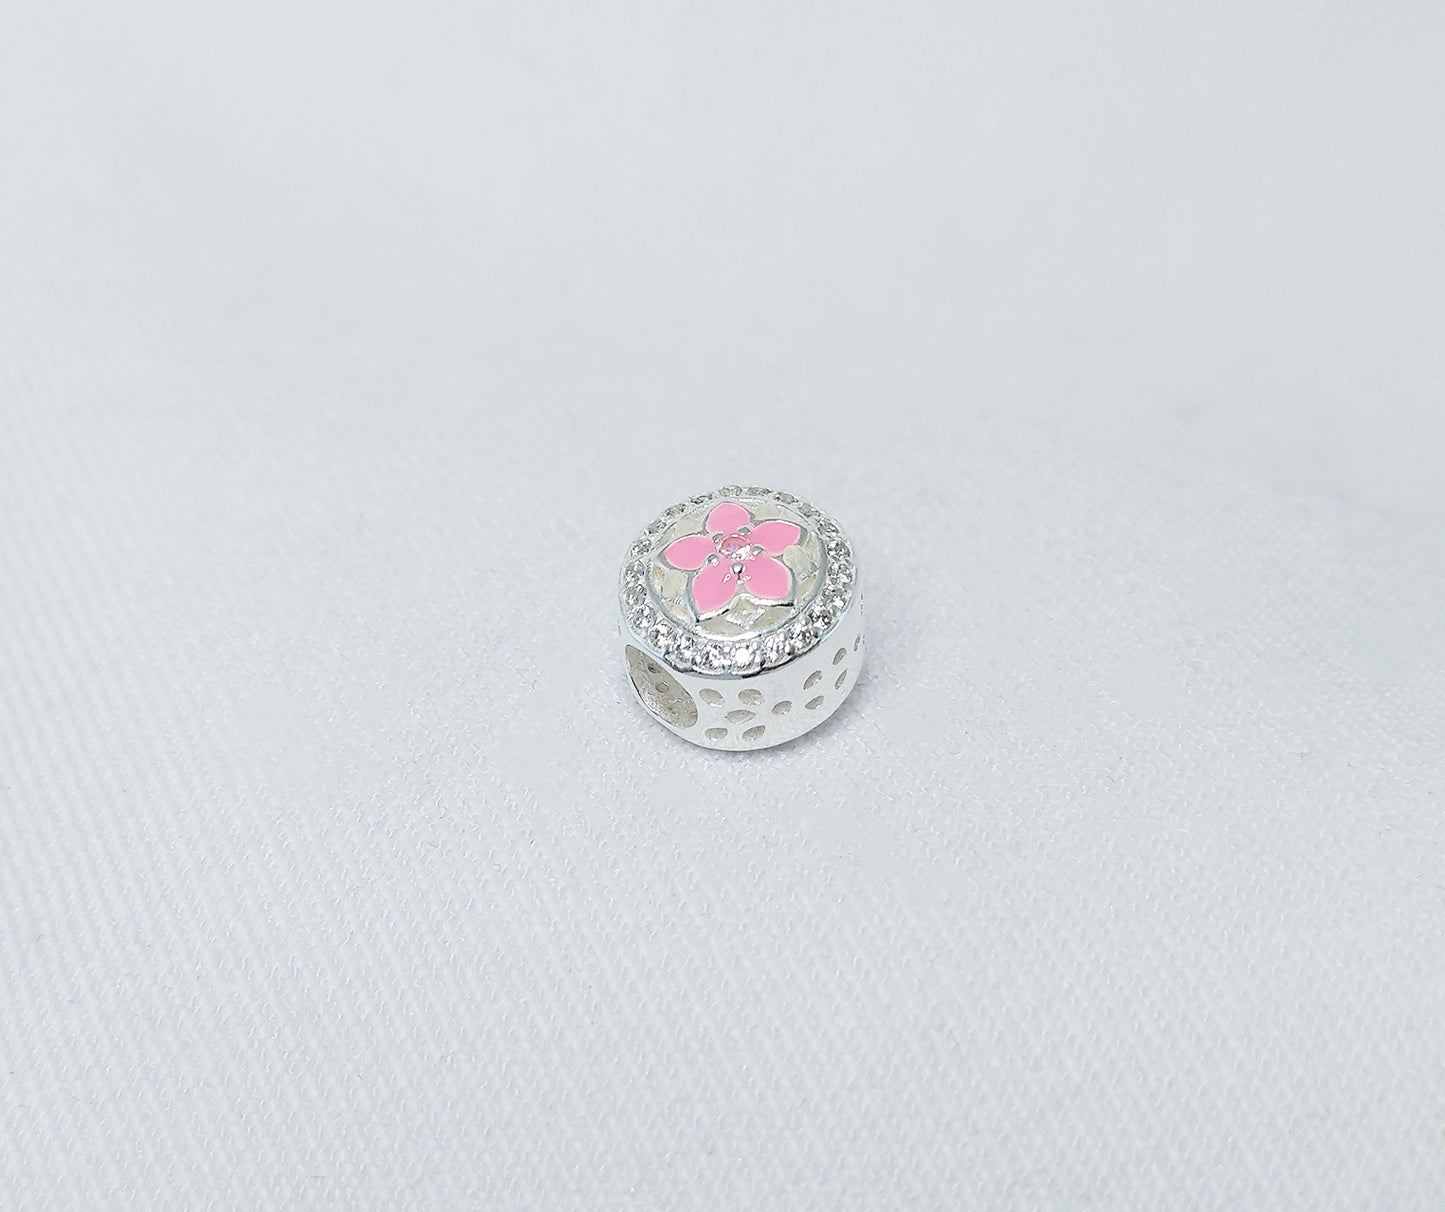 Sterling Silver Charm Bead with Cubic Zirconia Stones